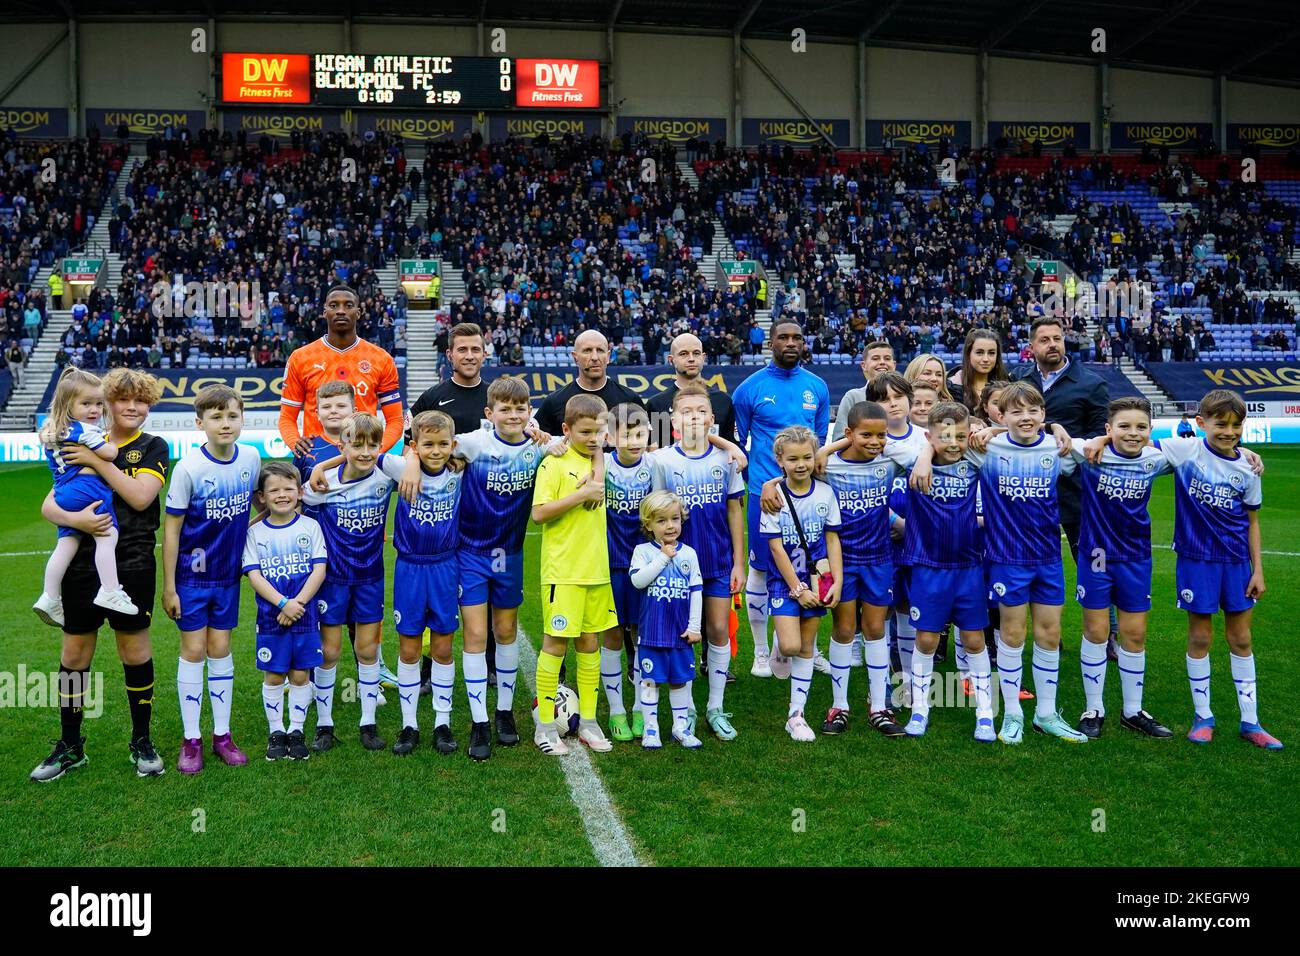 Mascots pose for a photo before the Sky Bet Championship match Wigan Athletic vs Blackpool at DW Stadium, Wigan, United Kingdom, 12th November 2022  (Photo by Steve Flynn/News Images) Stock Photo